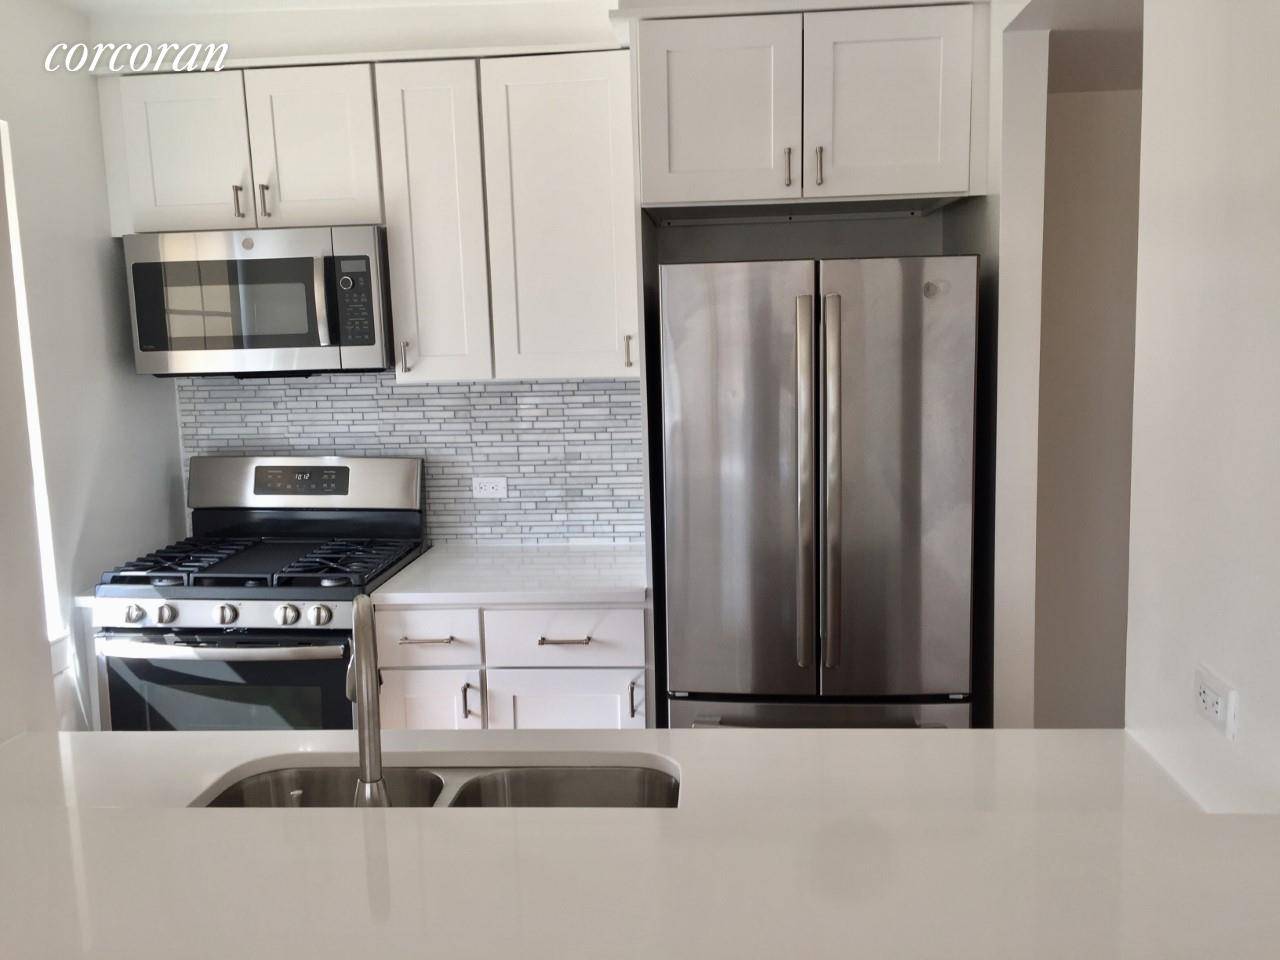 3 BED 2 BATH IN KEW GARDEN HILLS, QUEENS Please Note This is a lease break and currently tenant occupied.